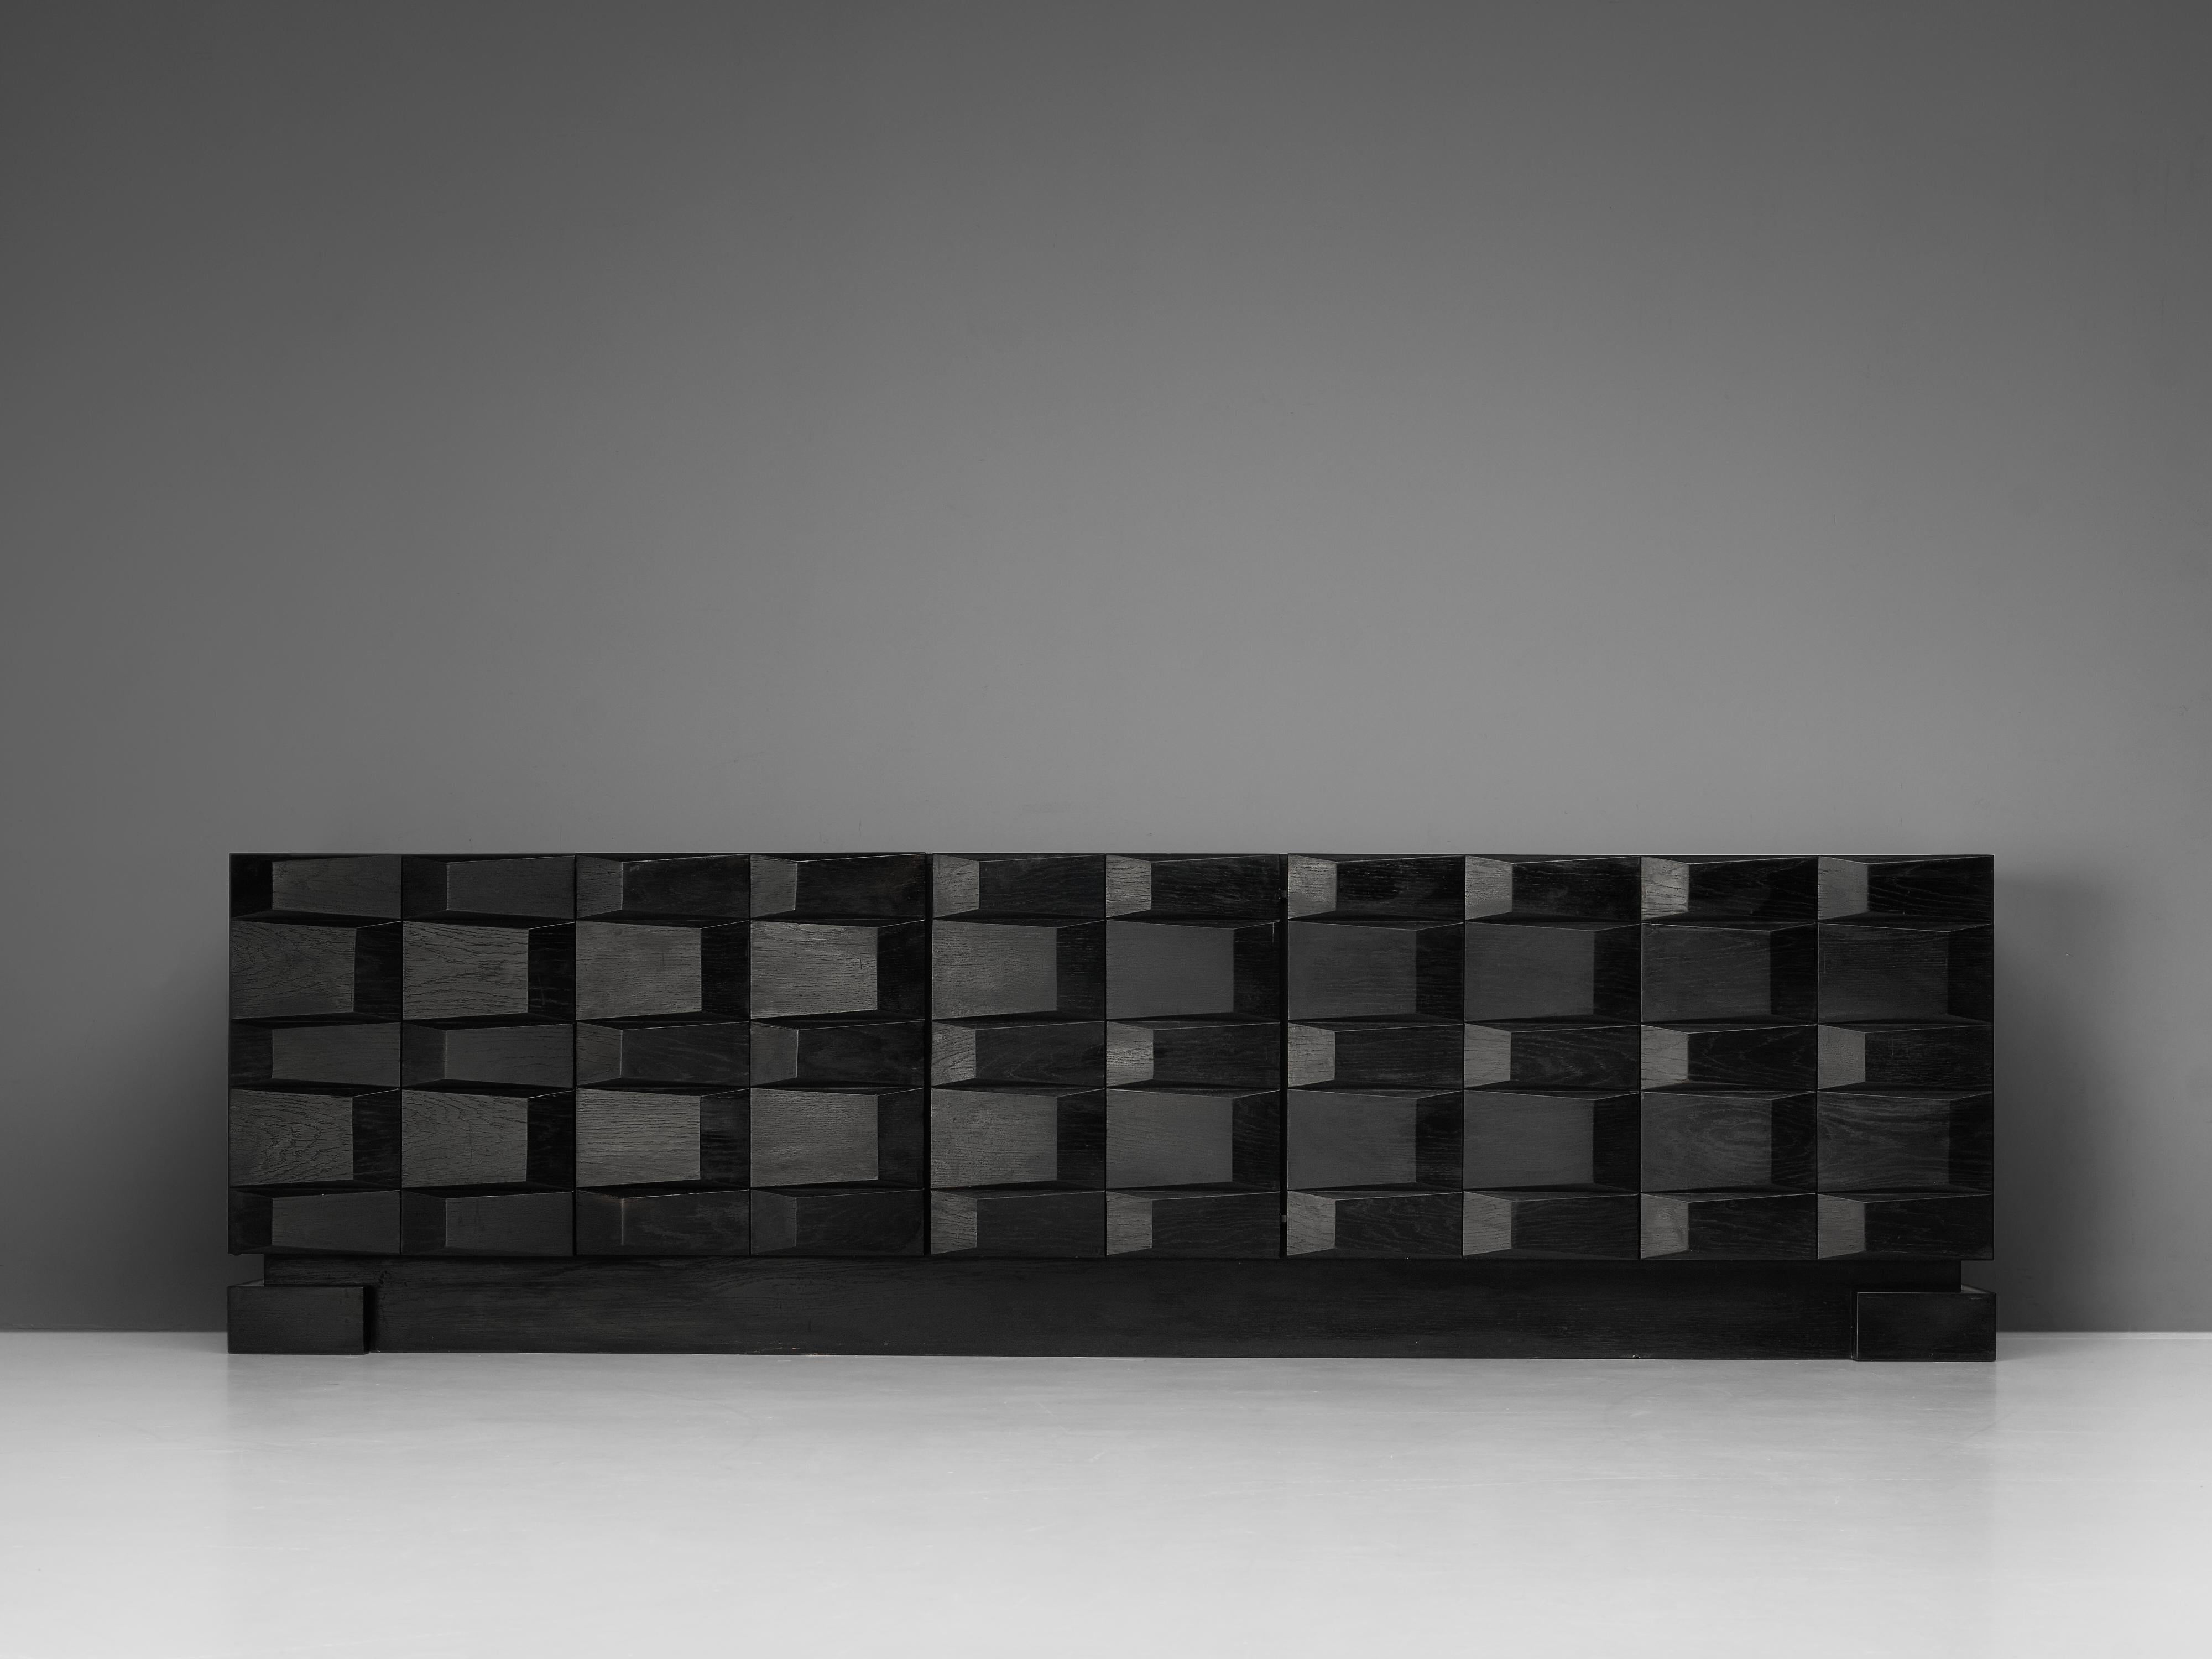 Brutalist sideboard, wood, Belgium, 1980s

Expressive sideboard in black colored wood. This brutalist piece catches the eye. The geometric relief of the front side creates a graphical, geometric look. The three-dimensional feeling creates a strong